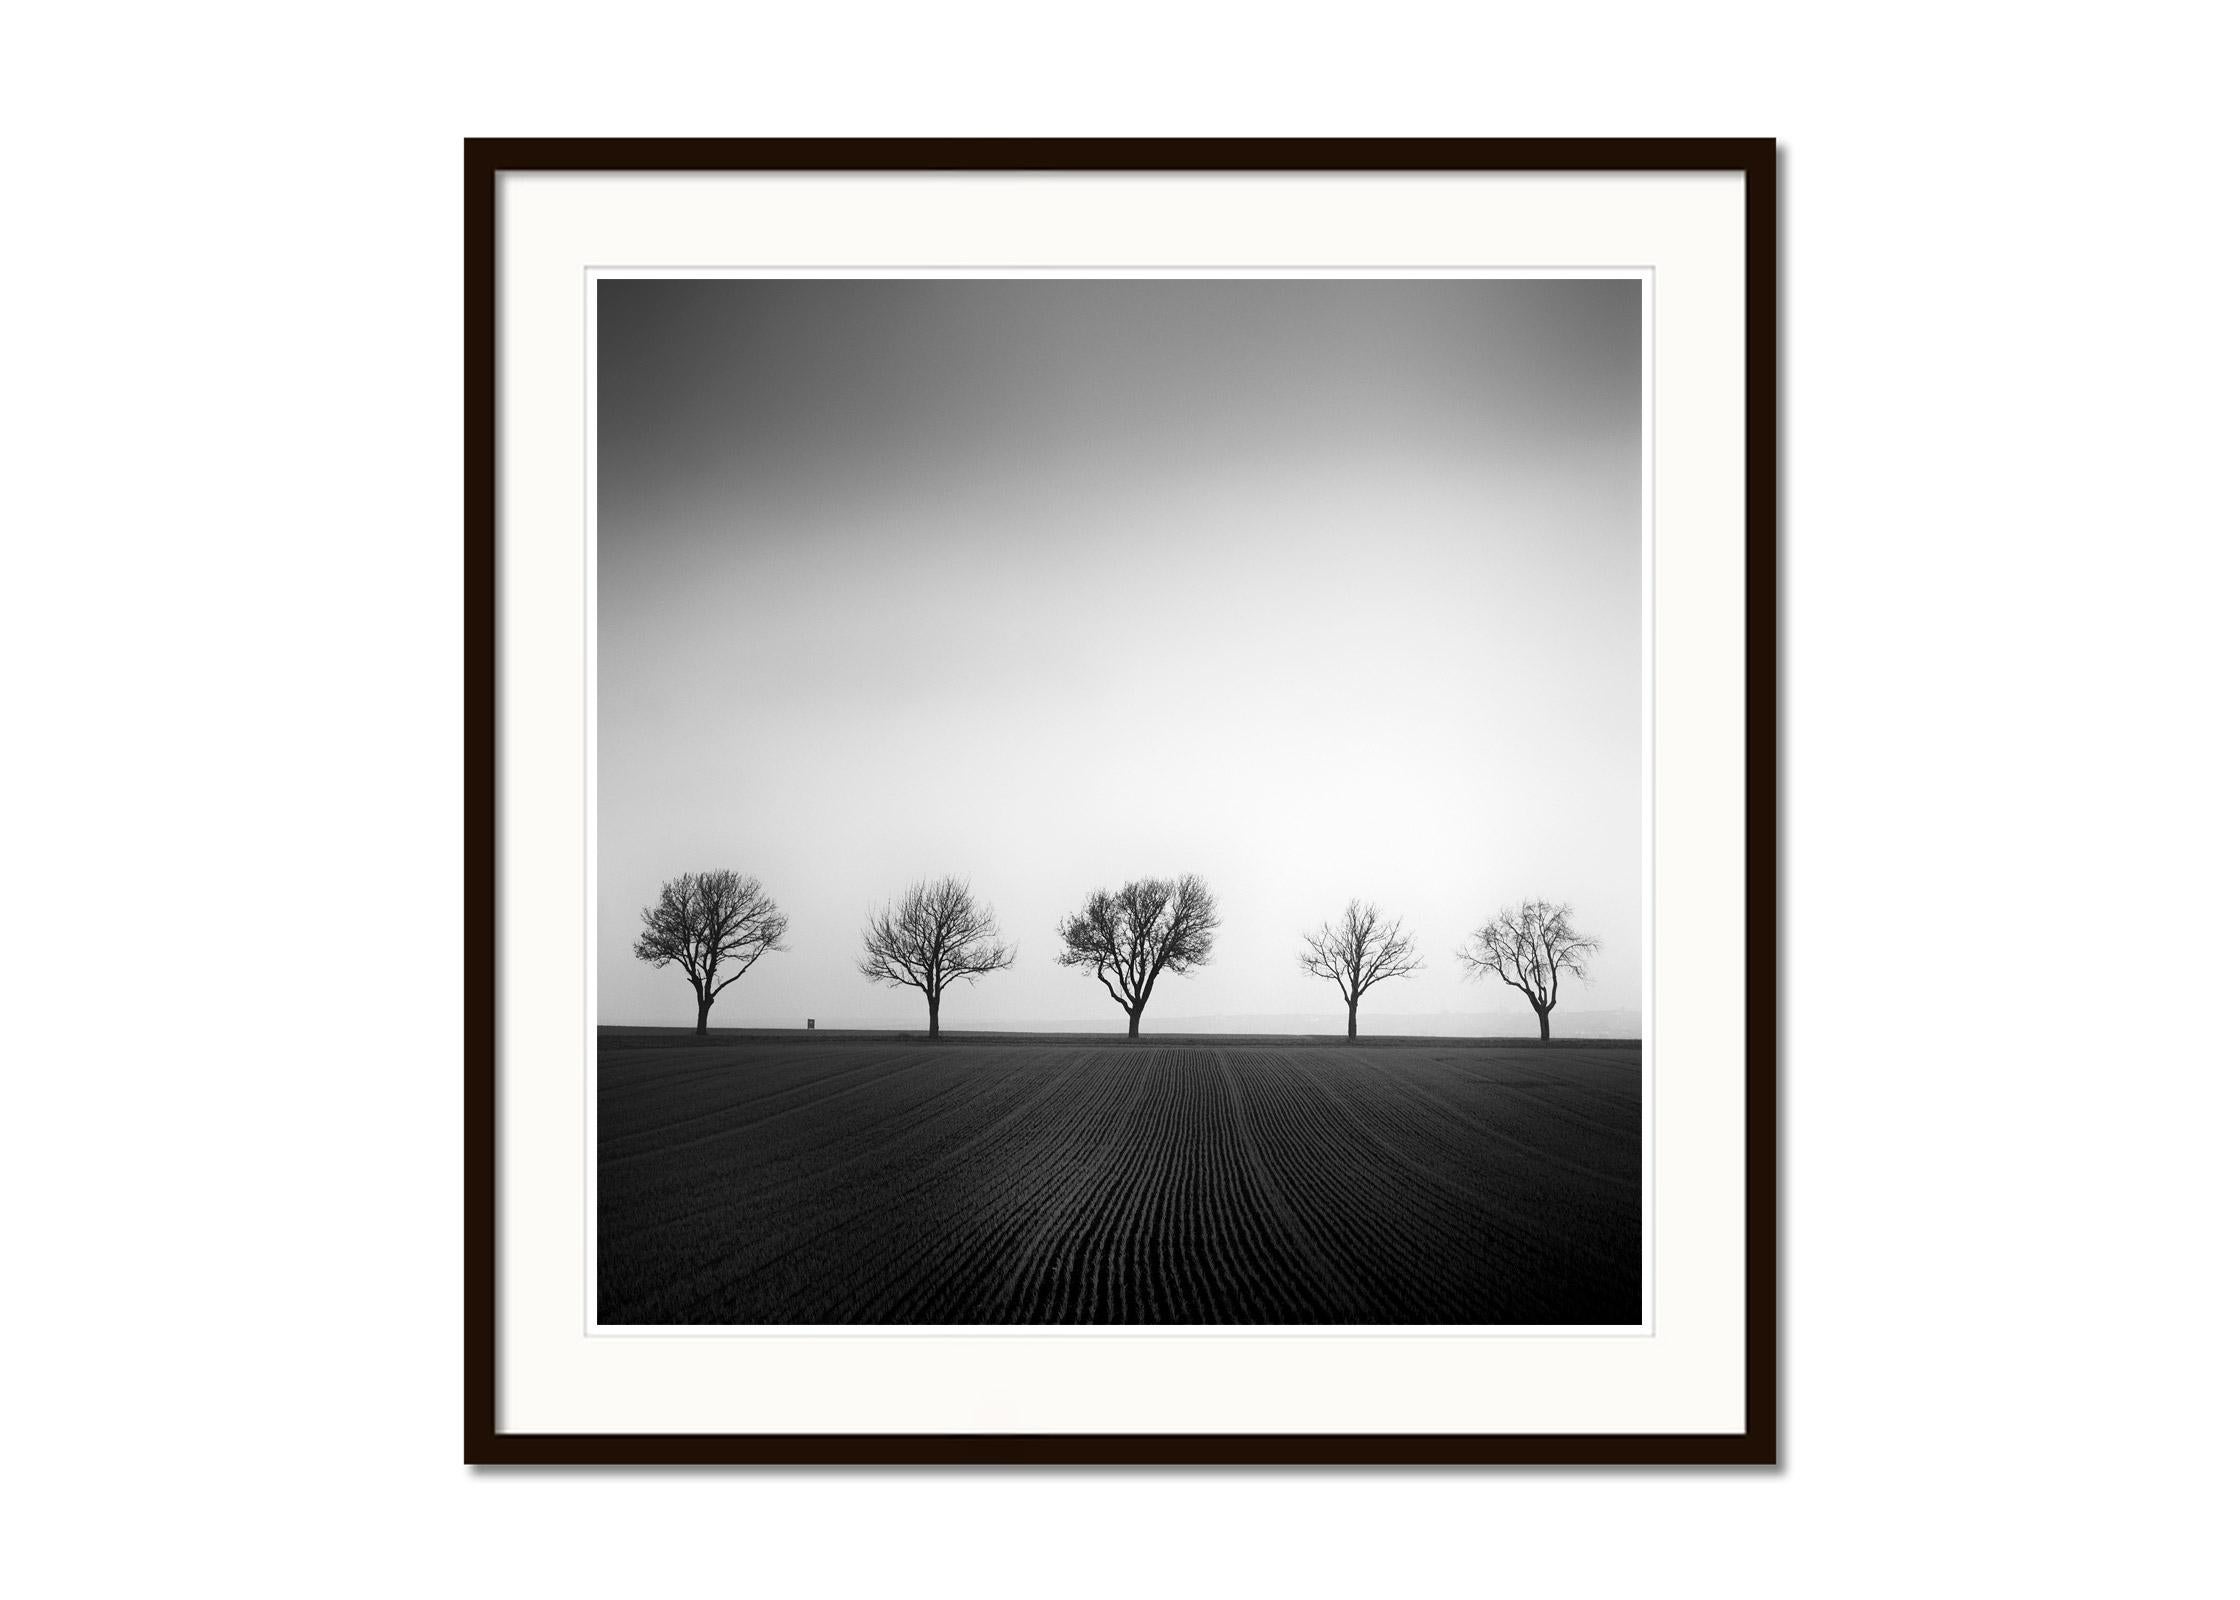 Black and white fine art landscape photography. Cherry tree avenue with lines in the corn field, Austria. Archival pigment ink print, edition of 9. Signed, titled, dated and numbered by artist. Certificate of authenticity included. Printed with 4cm